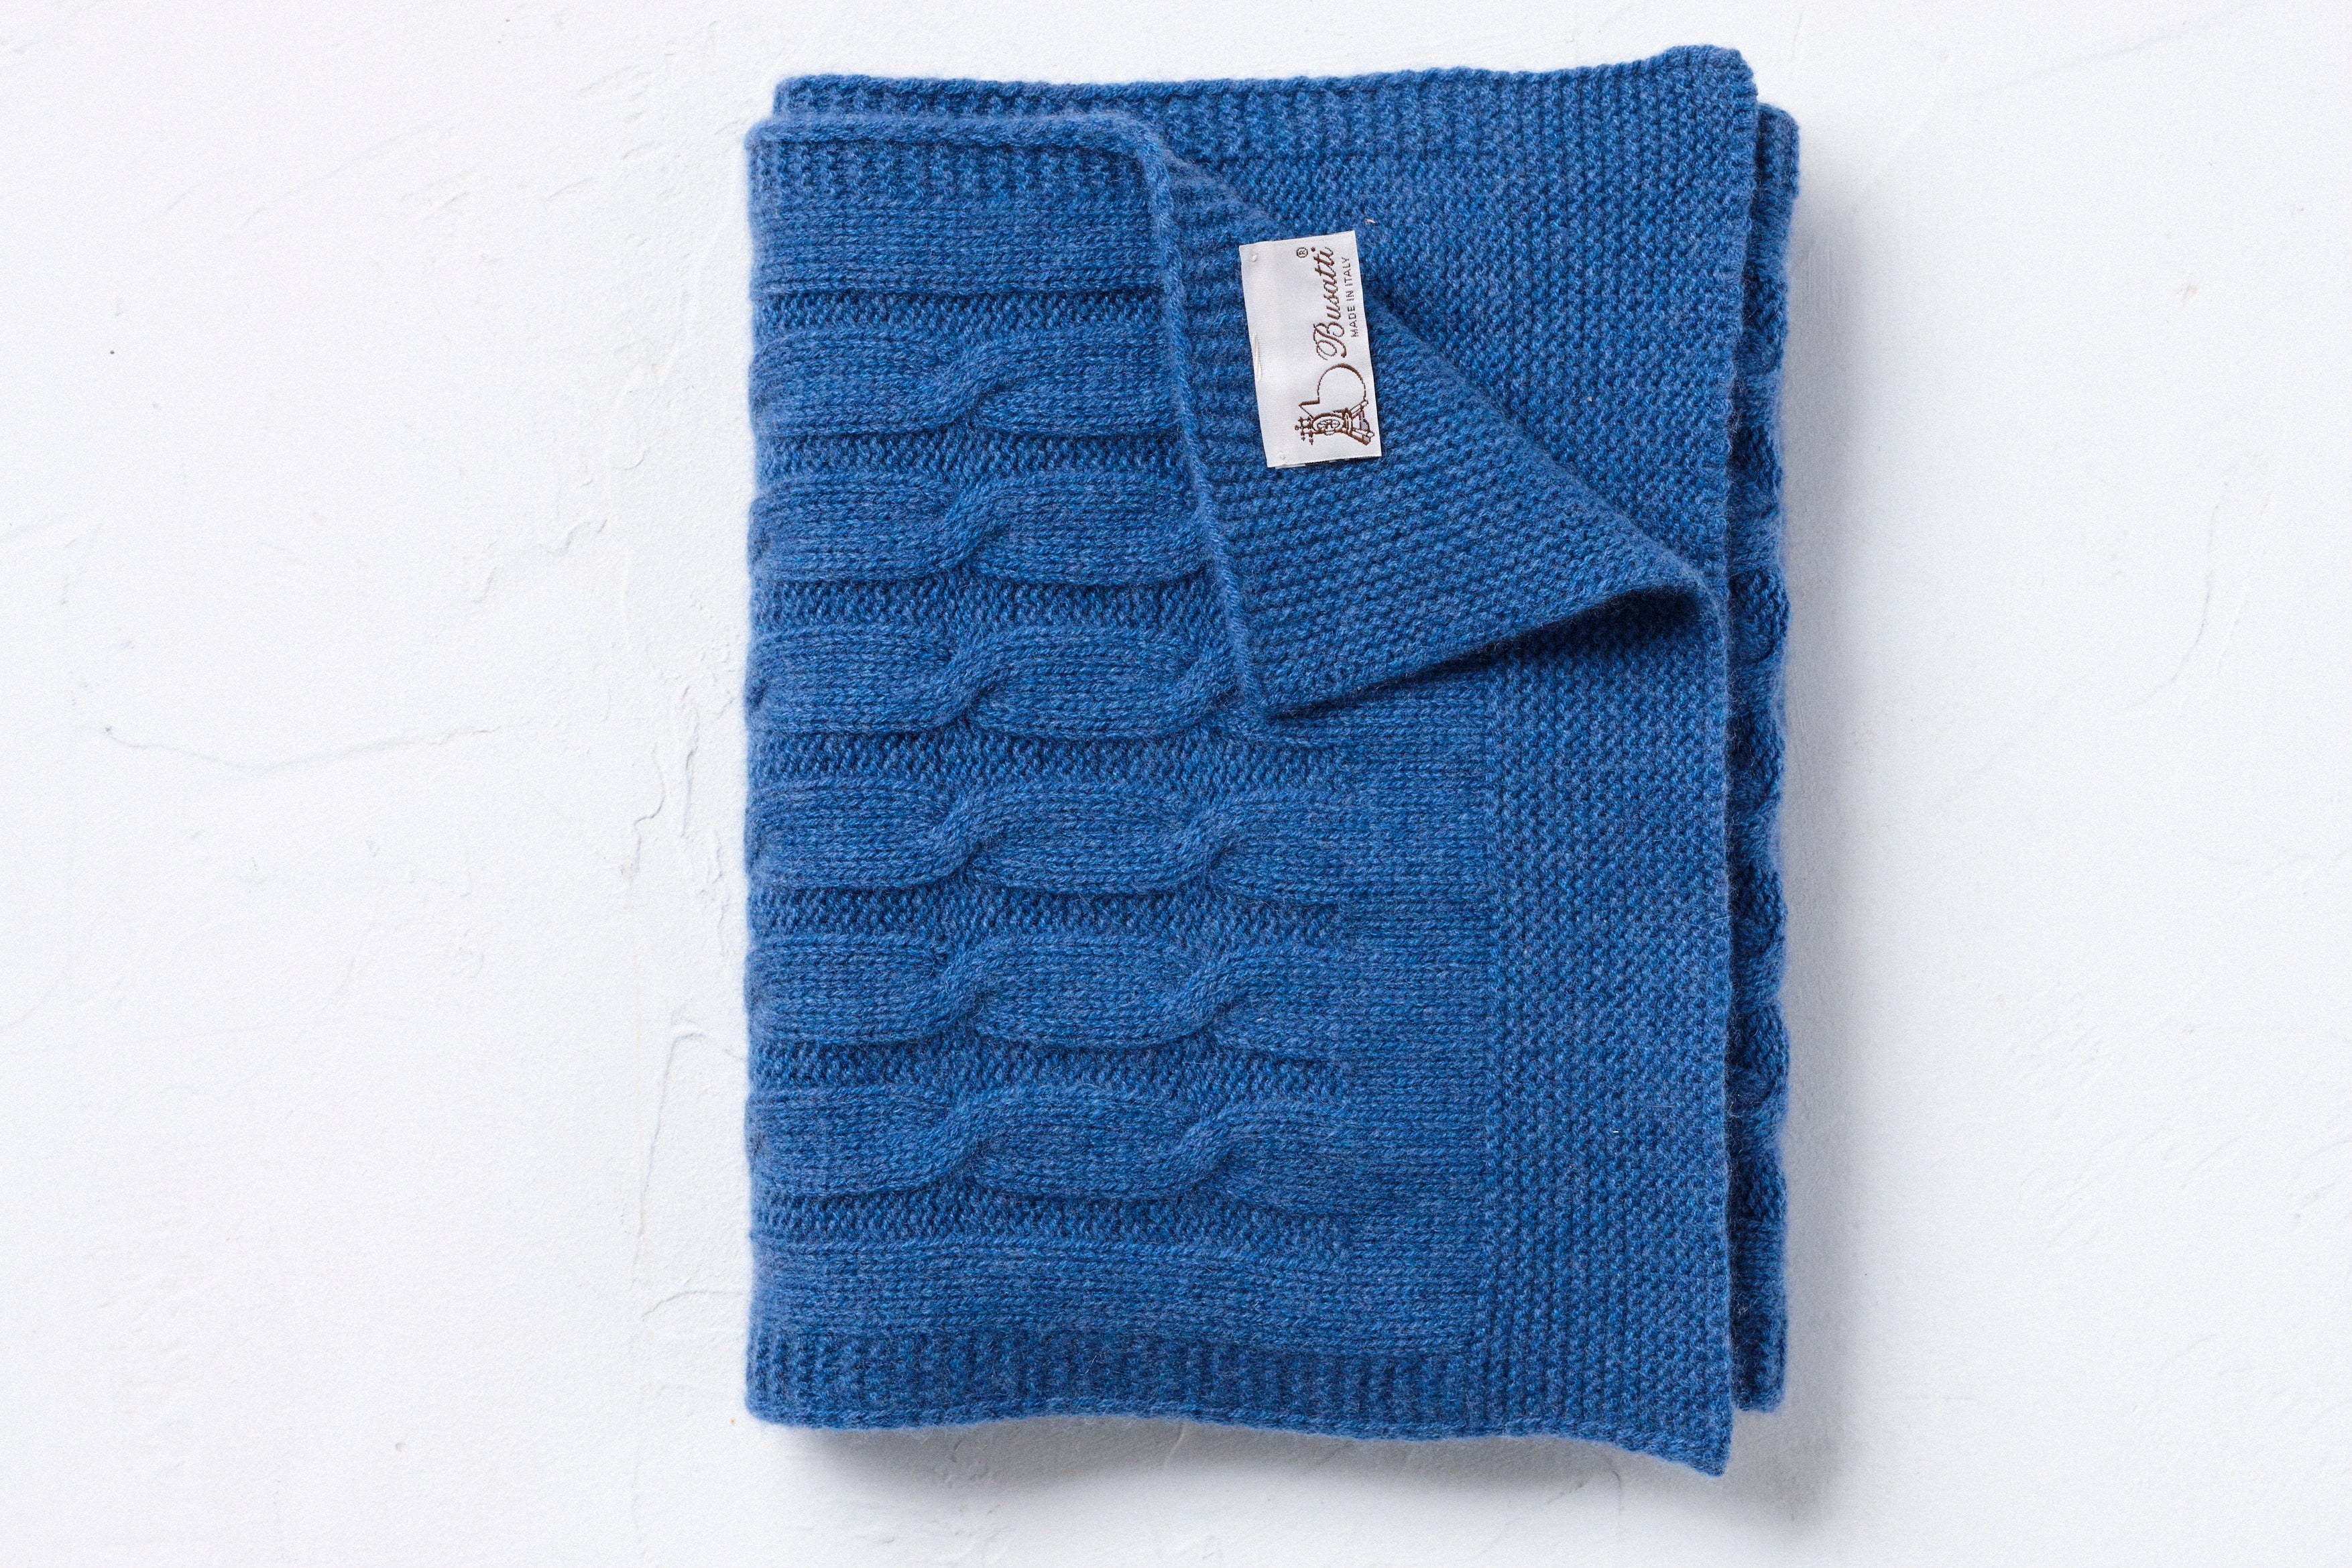 Cable Knit Cashmere Scarf